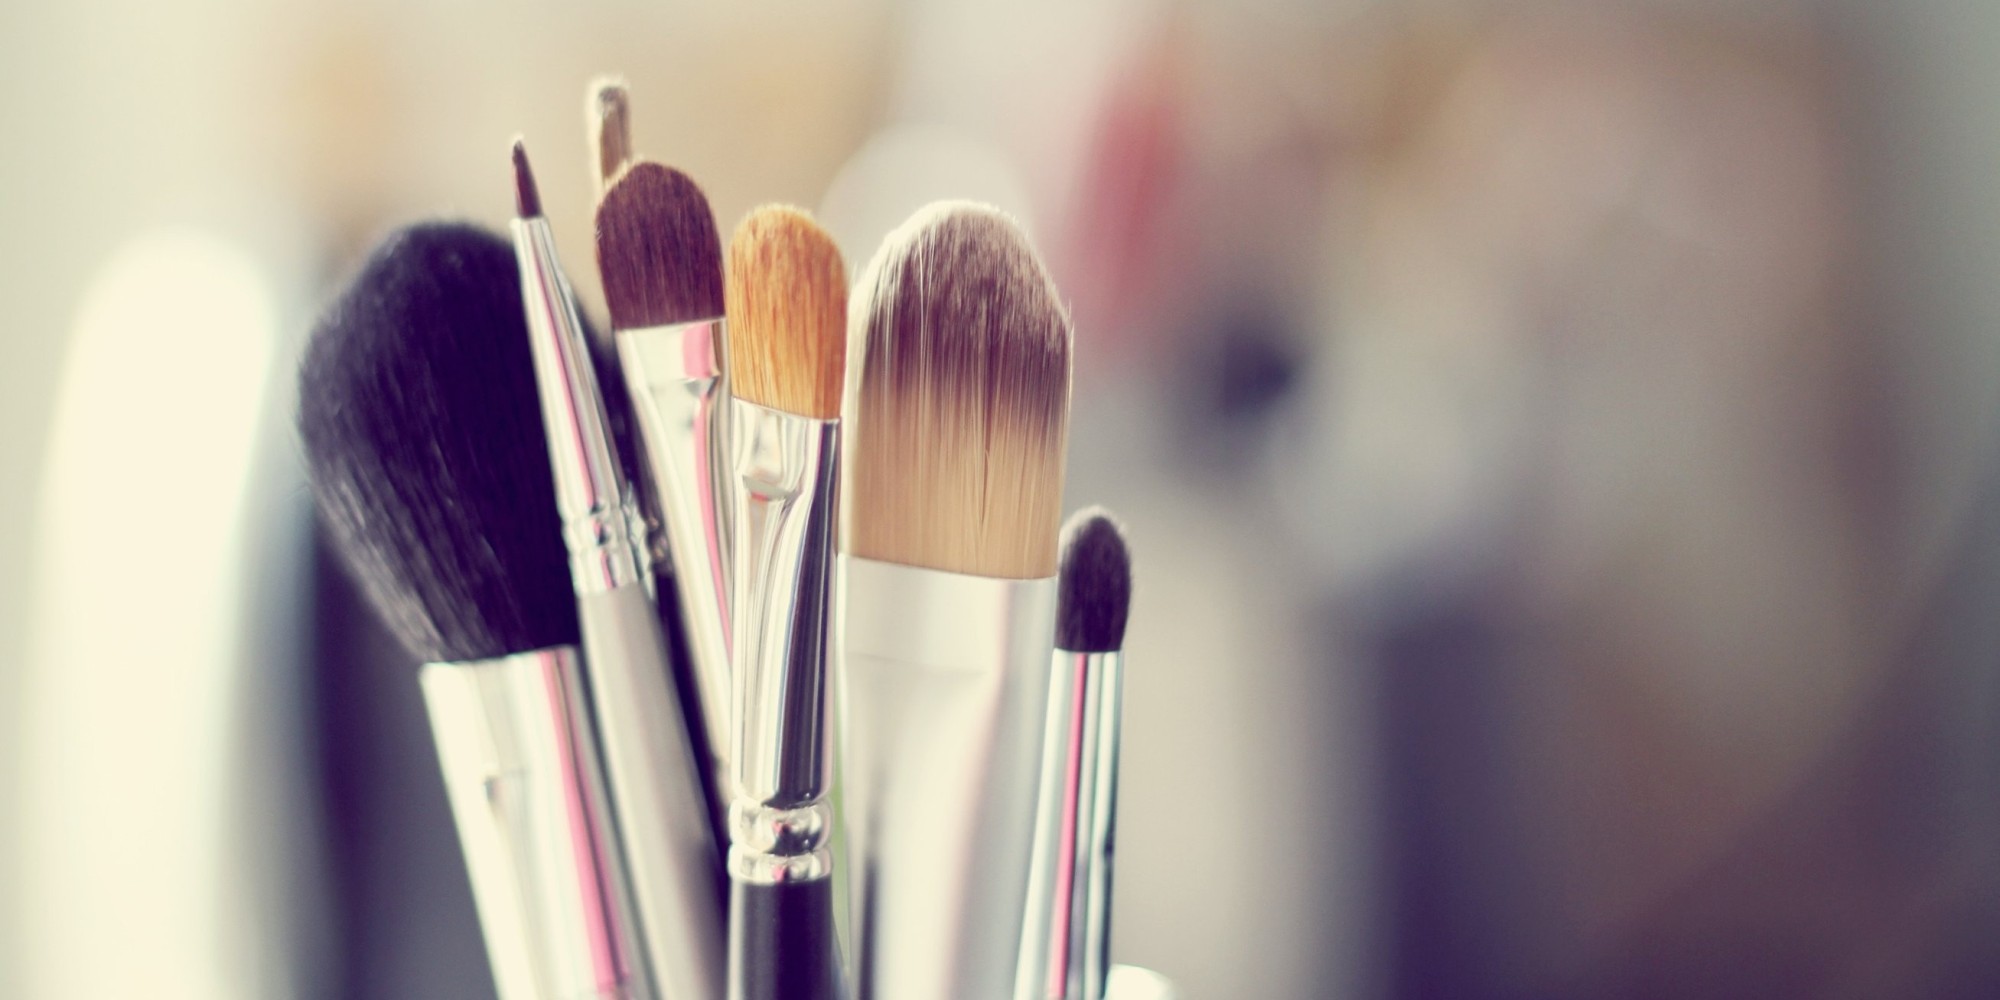 Cleaning Makeup Brushes